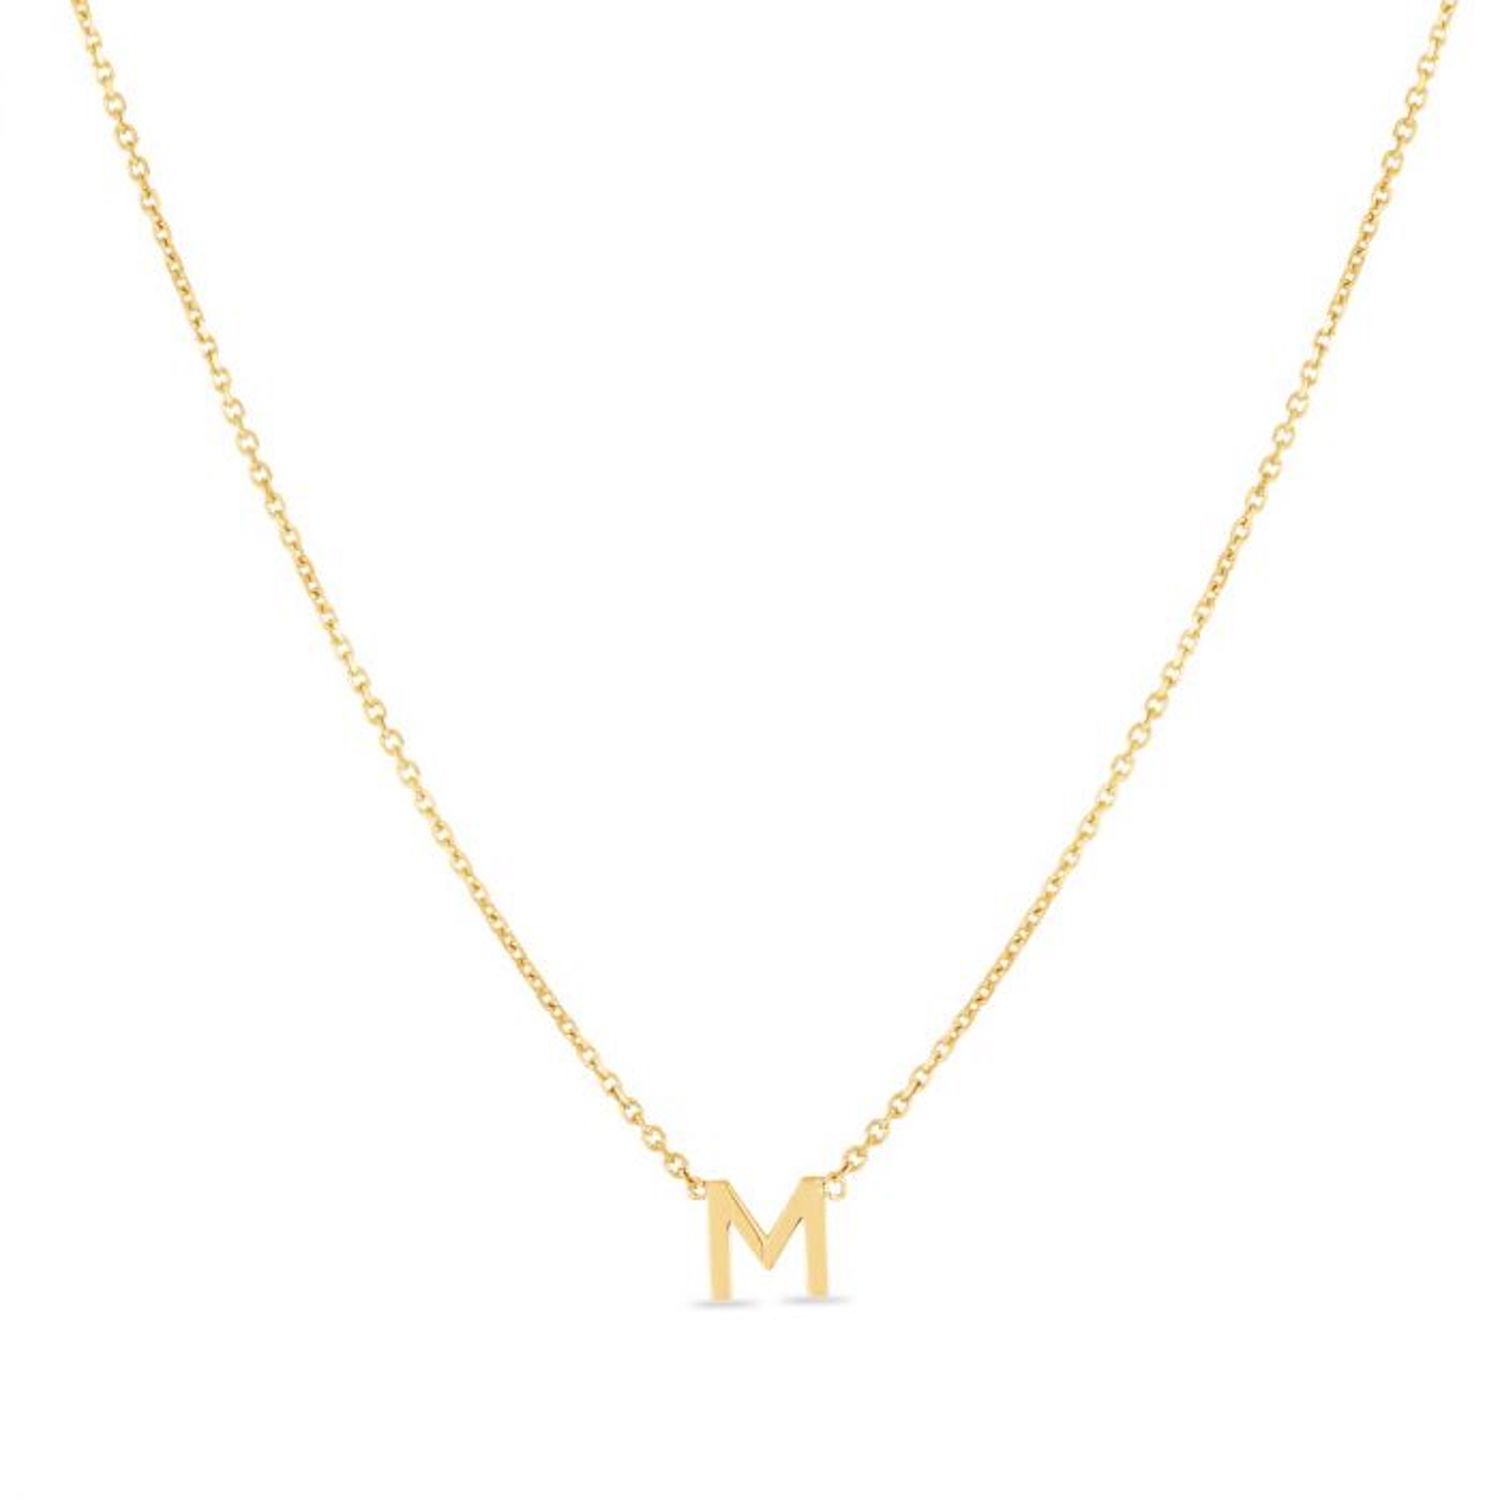 14K Yellow Gold Letter Initials Pendant Necklace 16"-18" - M